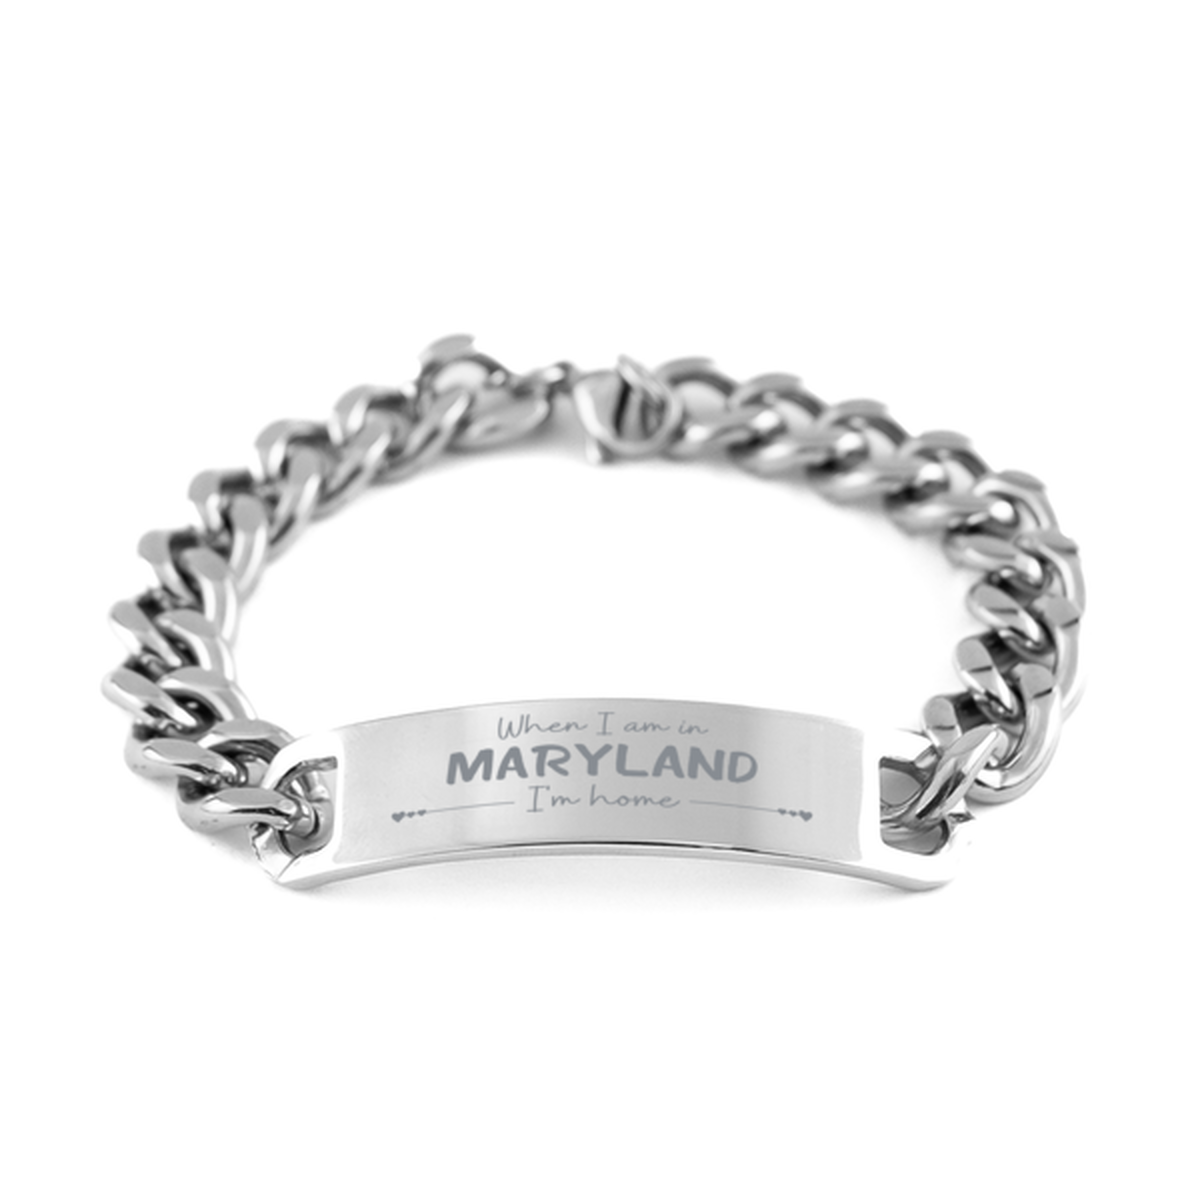 When I am in Maryland I'm home Cuban Chain Stainless Steel Bracelet, Cheap Gifts For Maryland, State Maryland Birthday Gifts for Friends Coworker